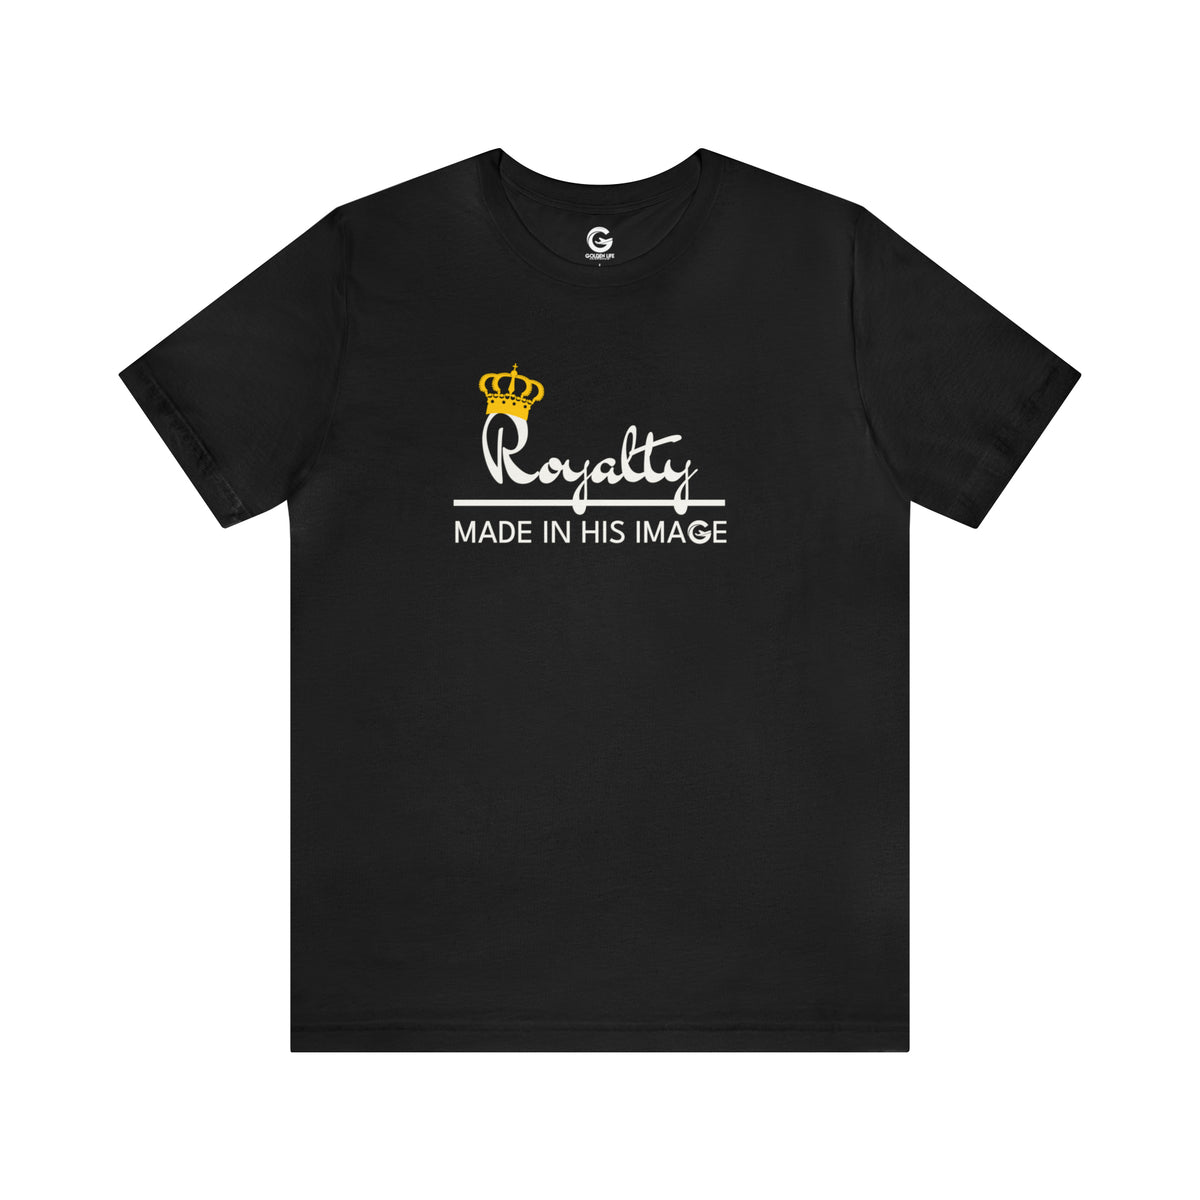 Royalty - Made in His Image Unisex Tee (Black)